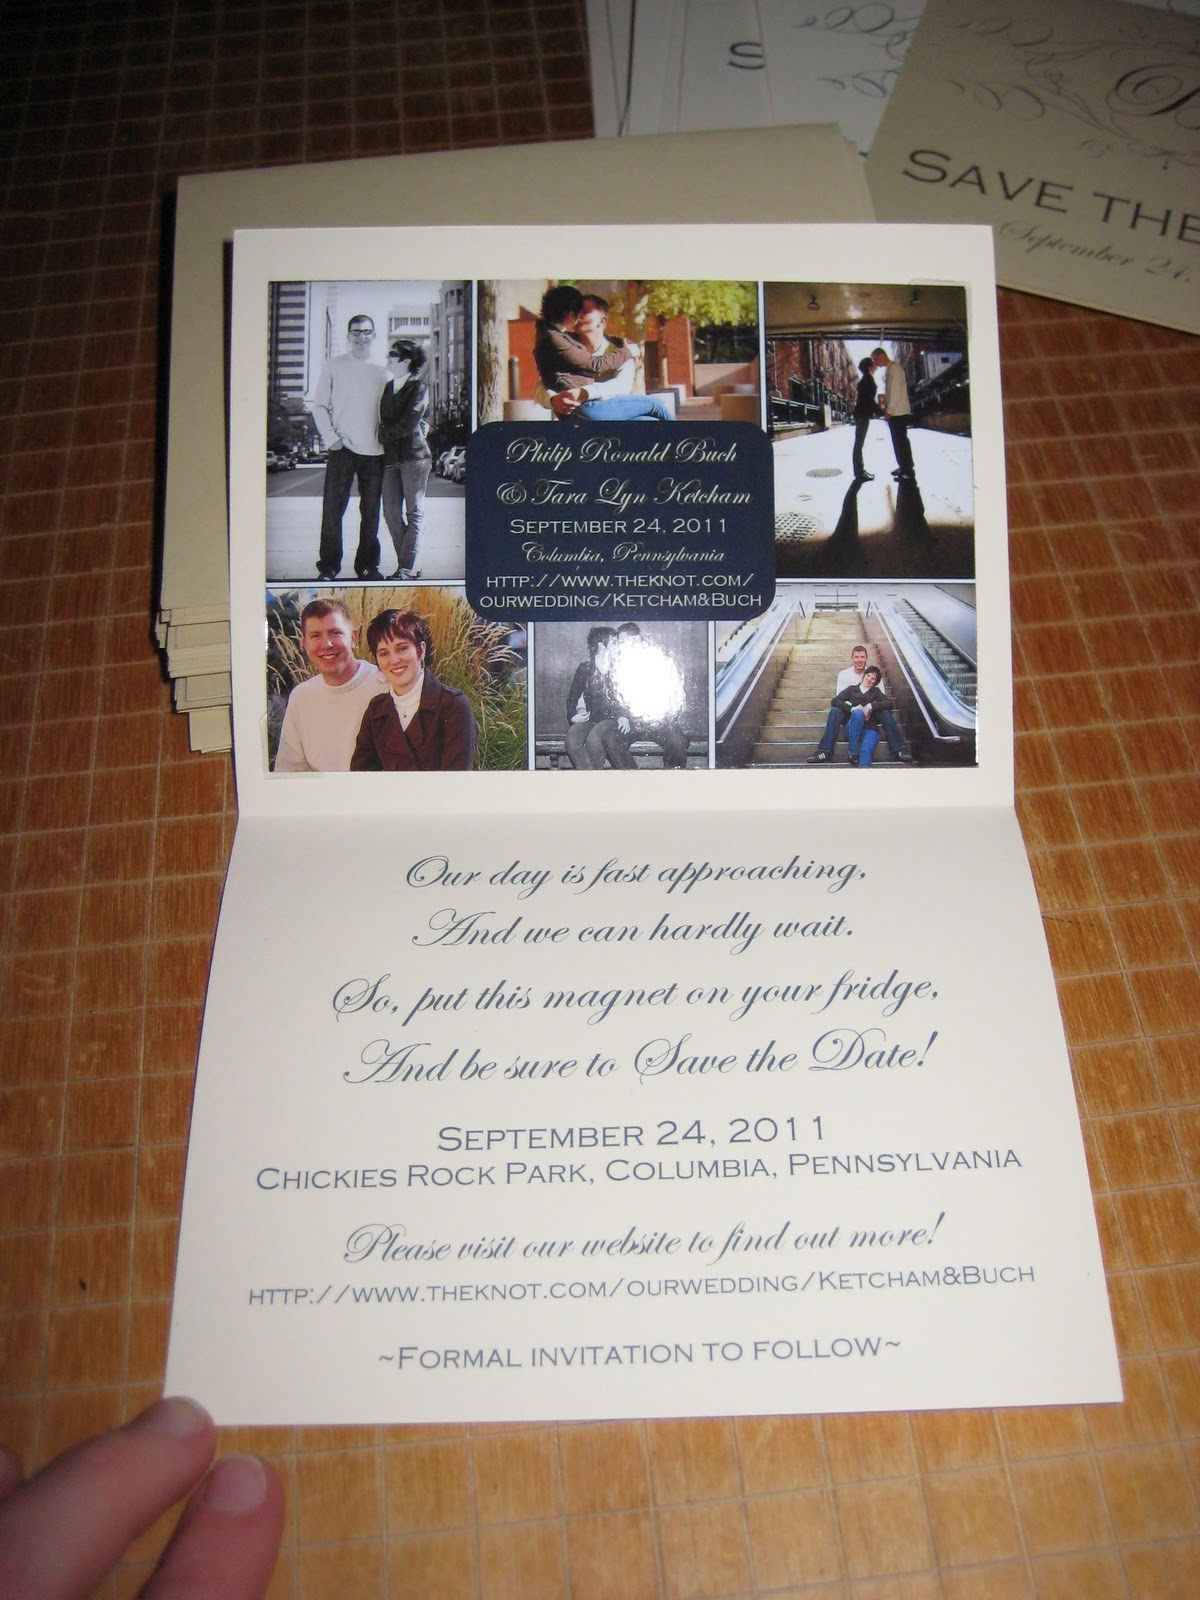 tara getting married: save the date magnets are done!